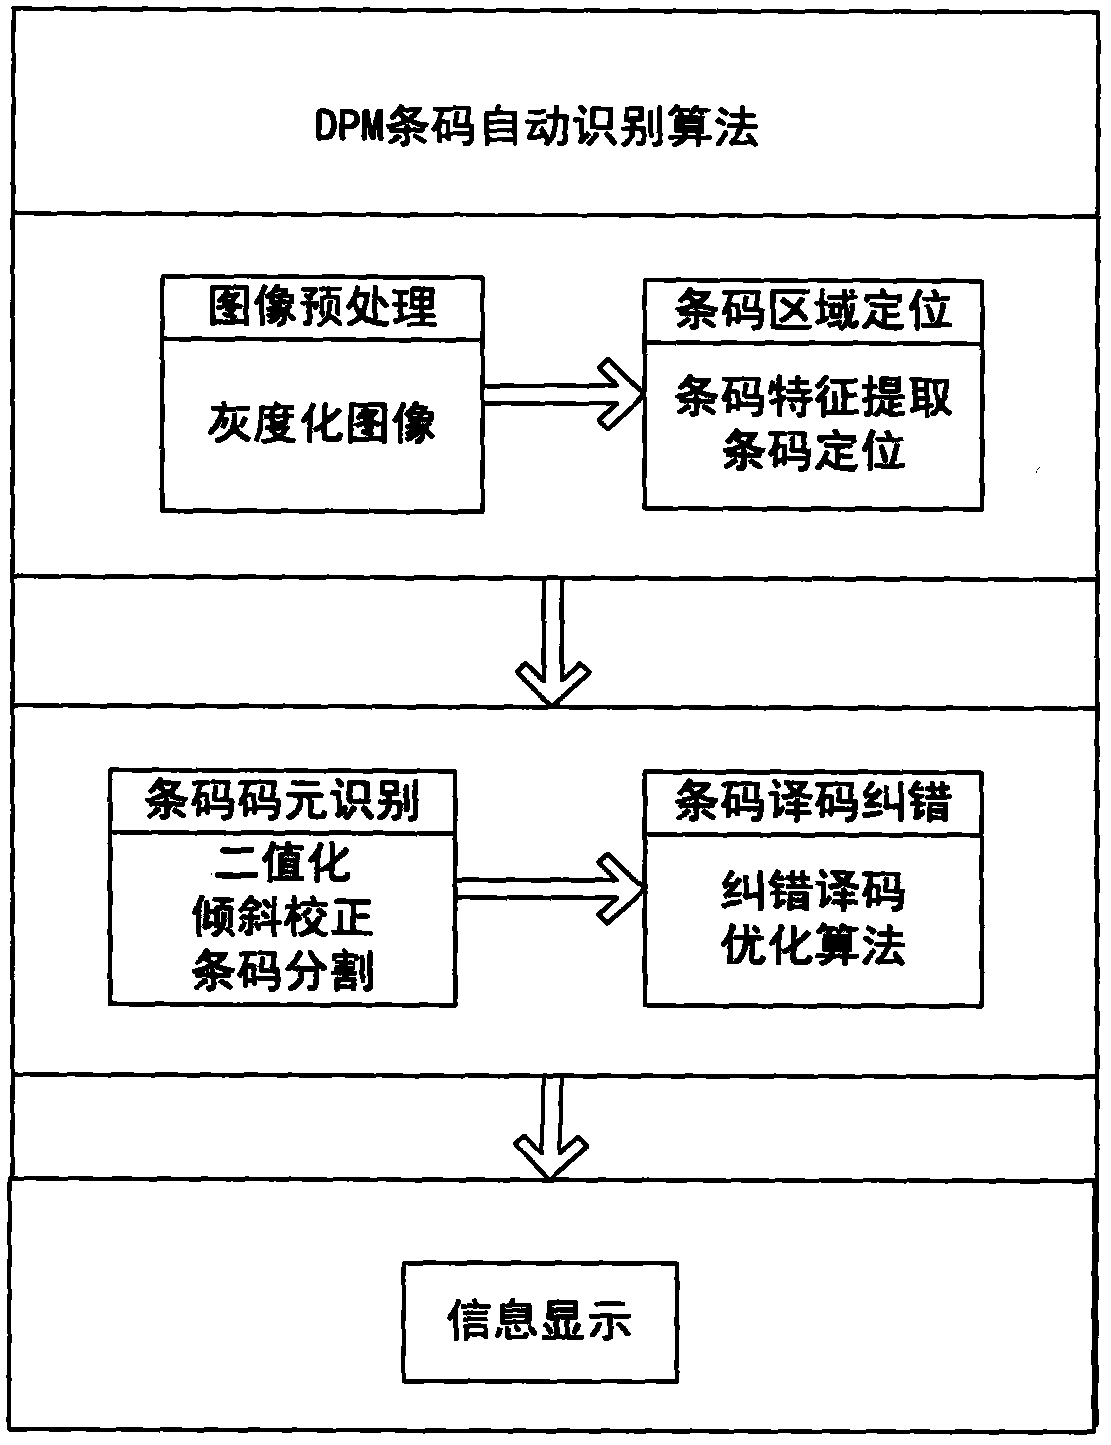 DPM (direct part mark) two-dimensional code recognition system